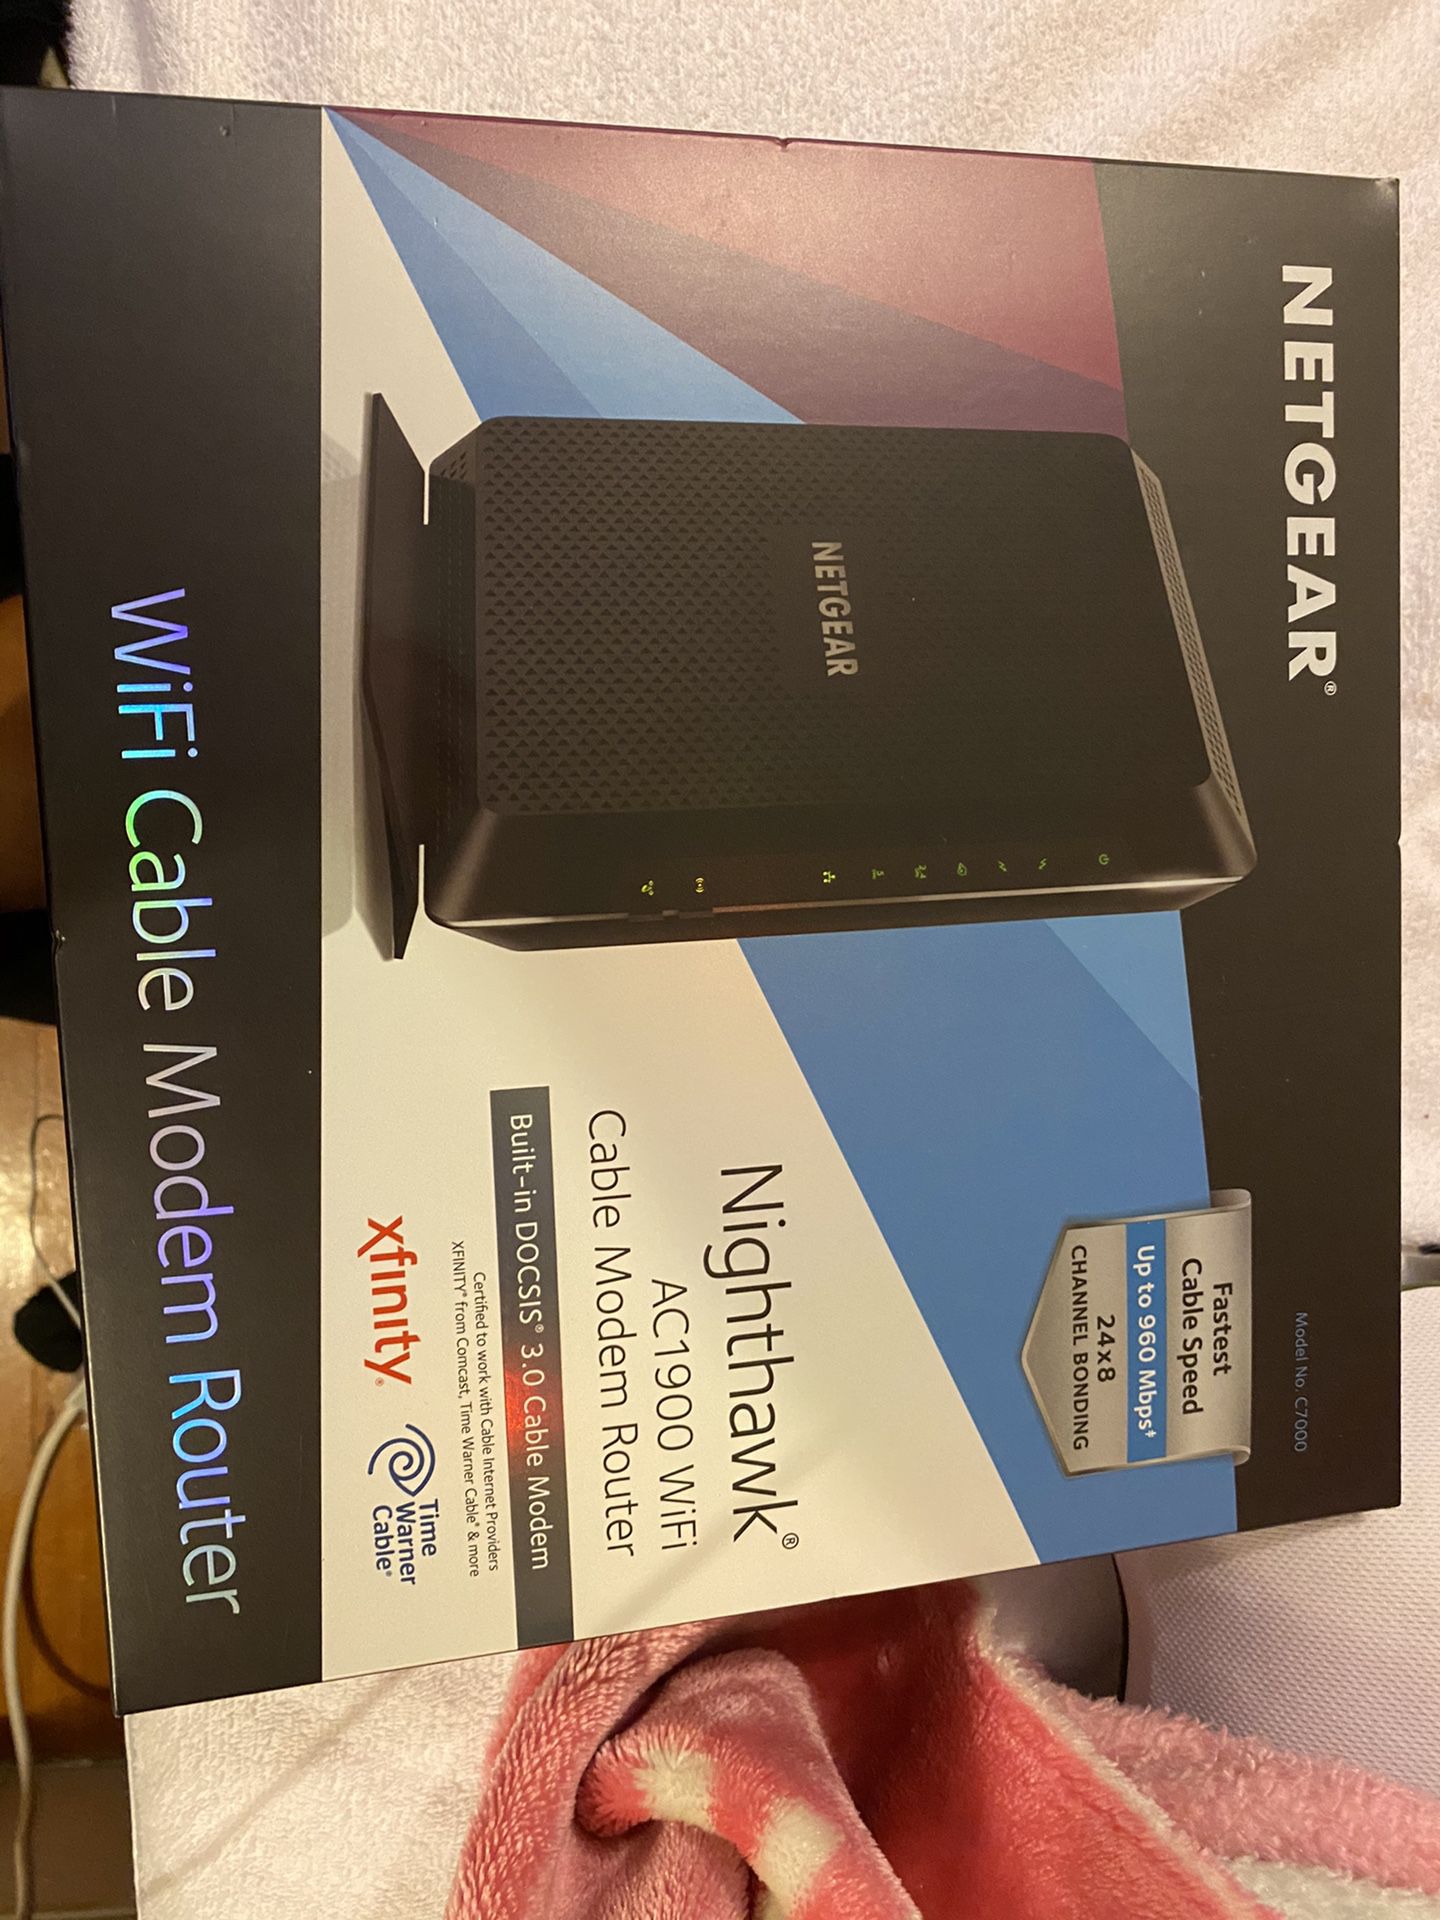 Nighthawk AC1900 Wifi Cable Modem Router